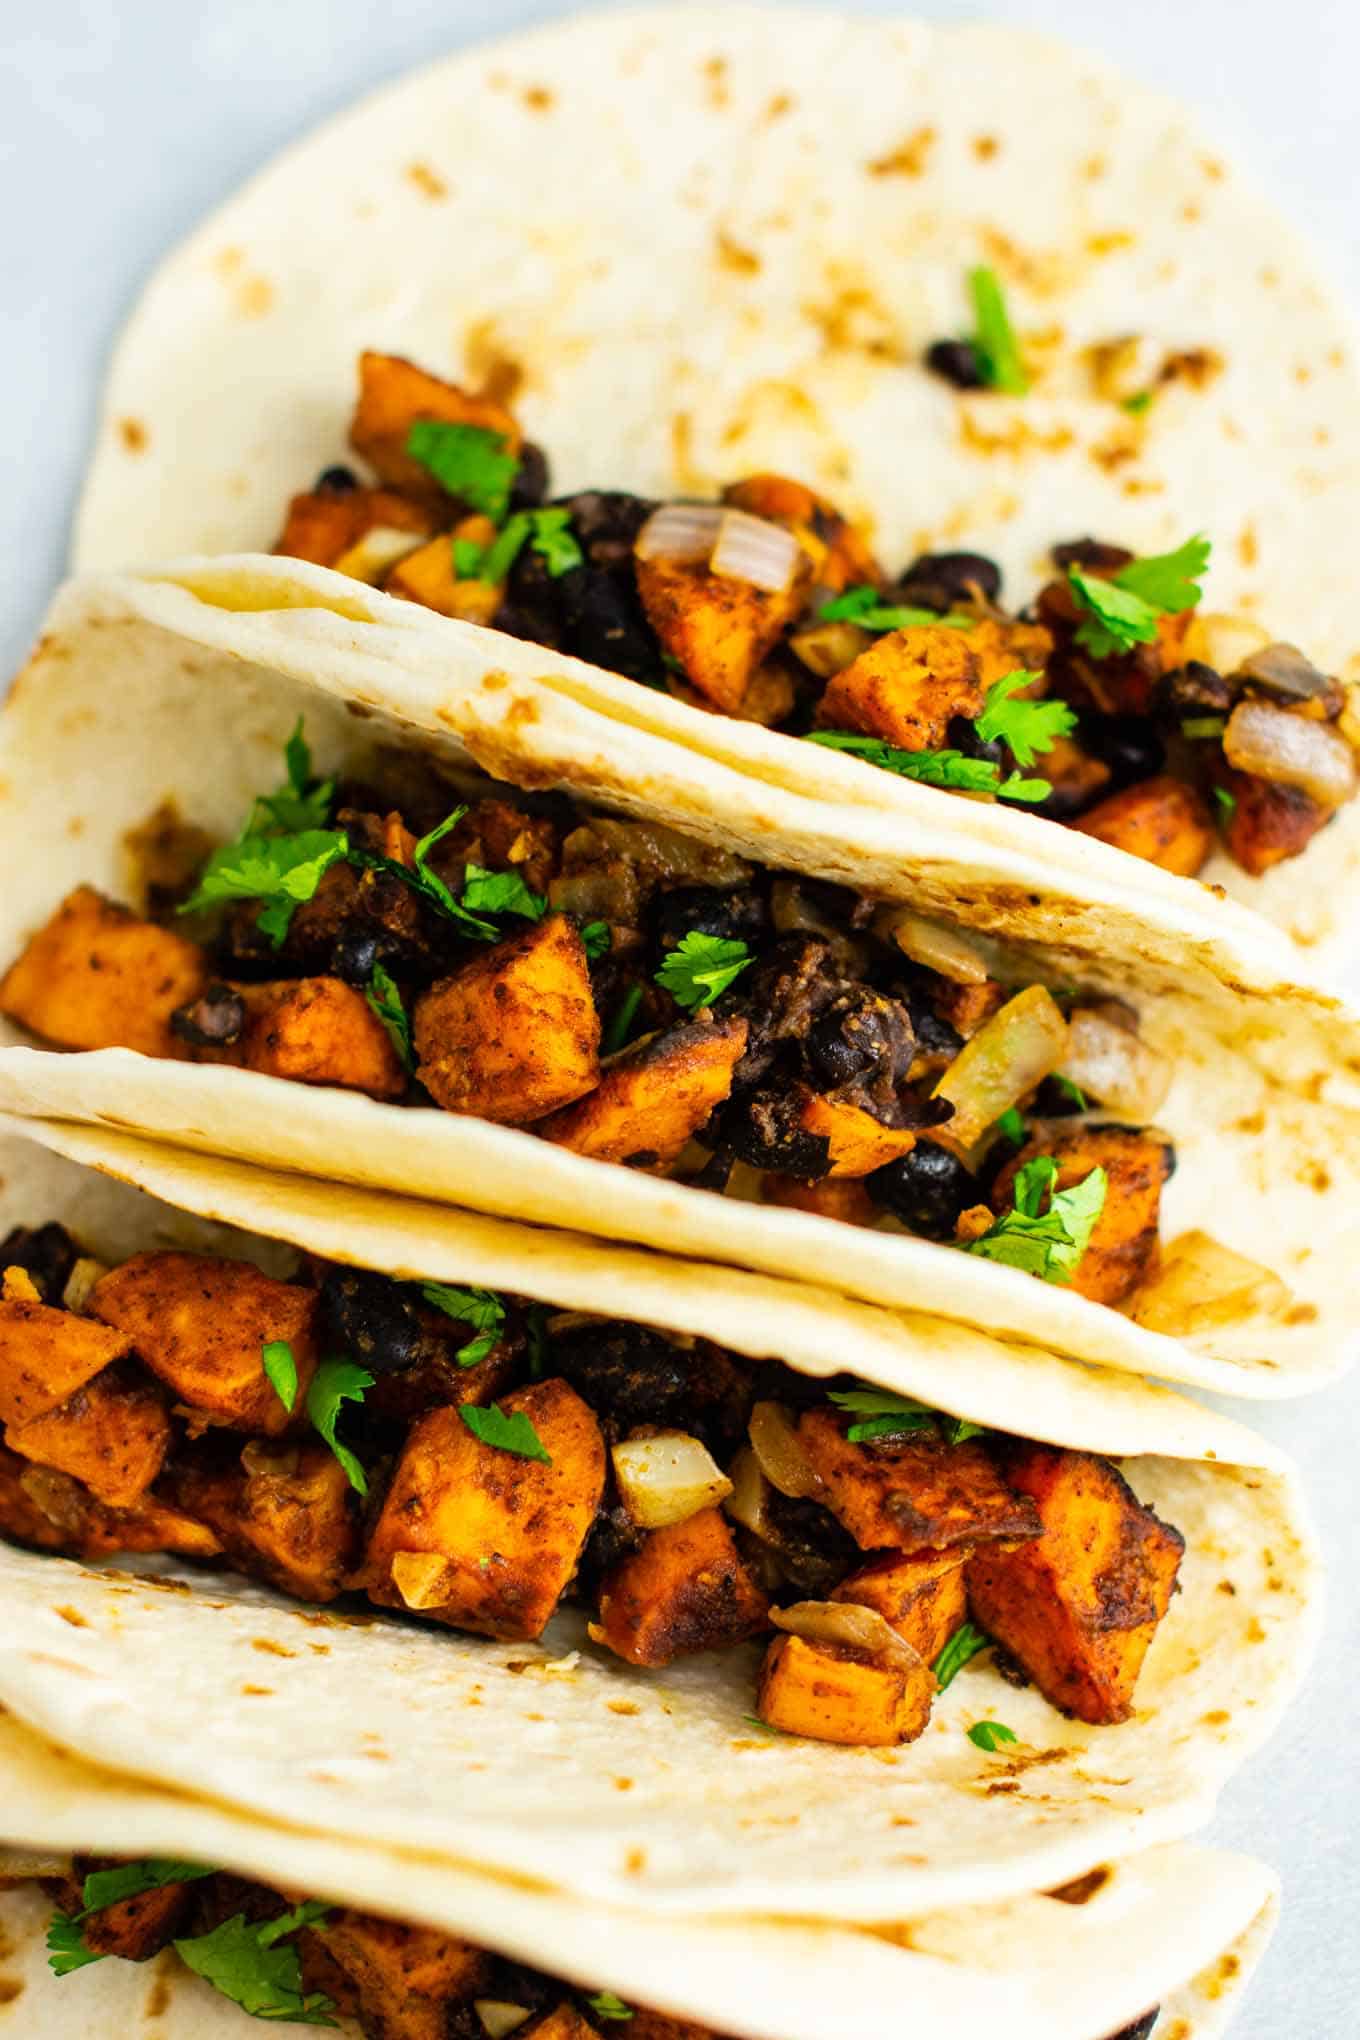 Sweet potato tacos with black beans and cilantro. Healthy, meatless, insanely delicious vegan dinner recipe! Serve with salsa and optional sour cream. #vegan #sweetpotatotacos #sweetpotatorecipes #sweetpotato #veganmexican #vegandinner #vegetarian #vegetariandinner #meatlessdinner #meatlesstacos #vegantacos